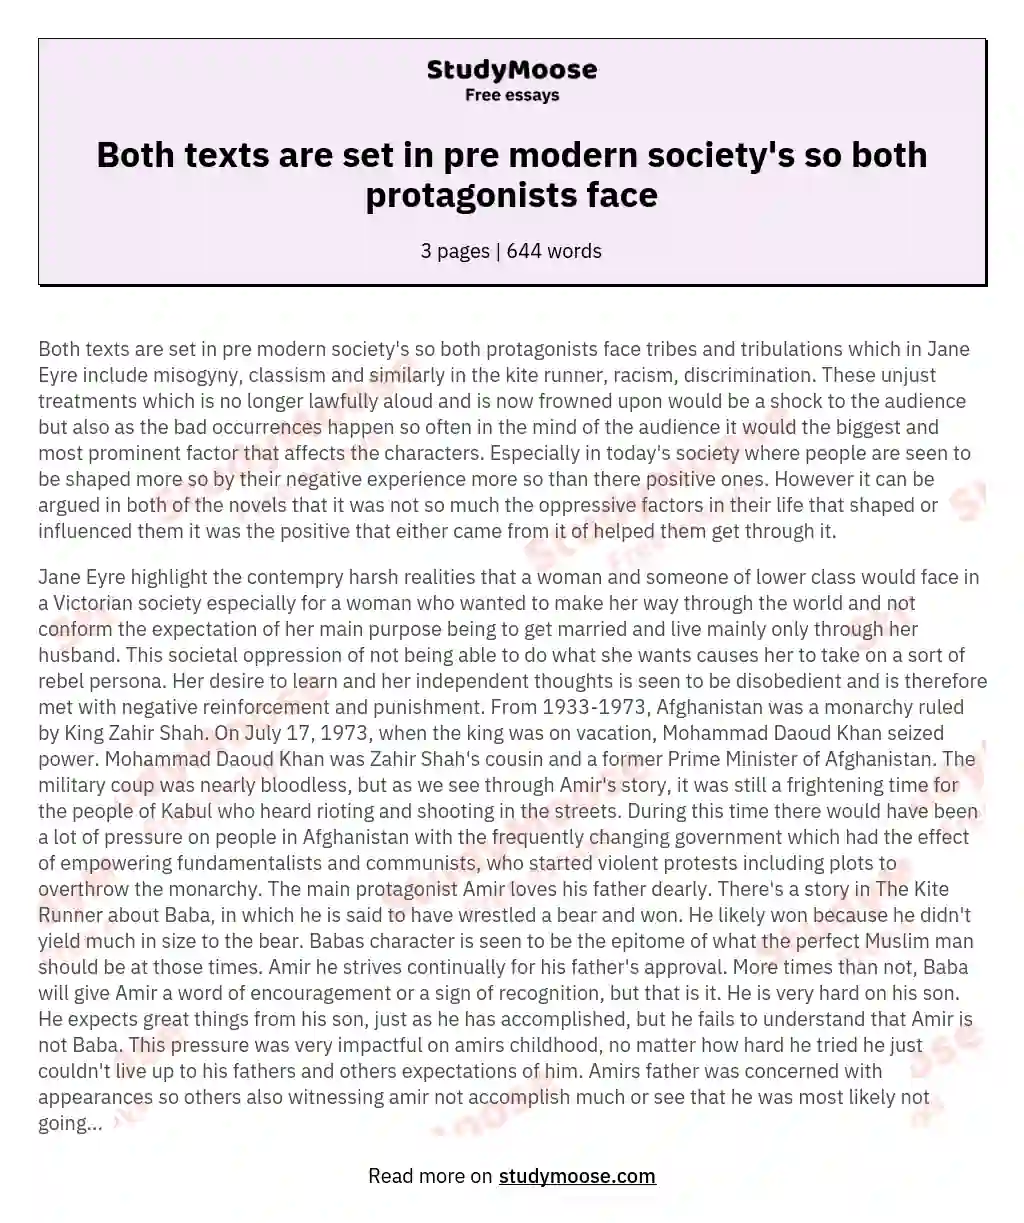 Both texts are set in pre modern society's so both protagonists face